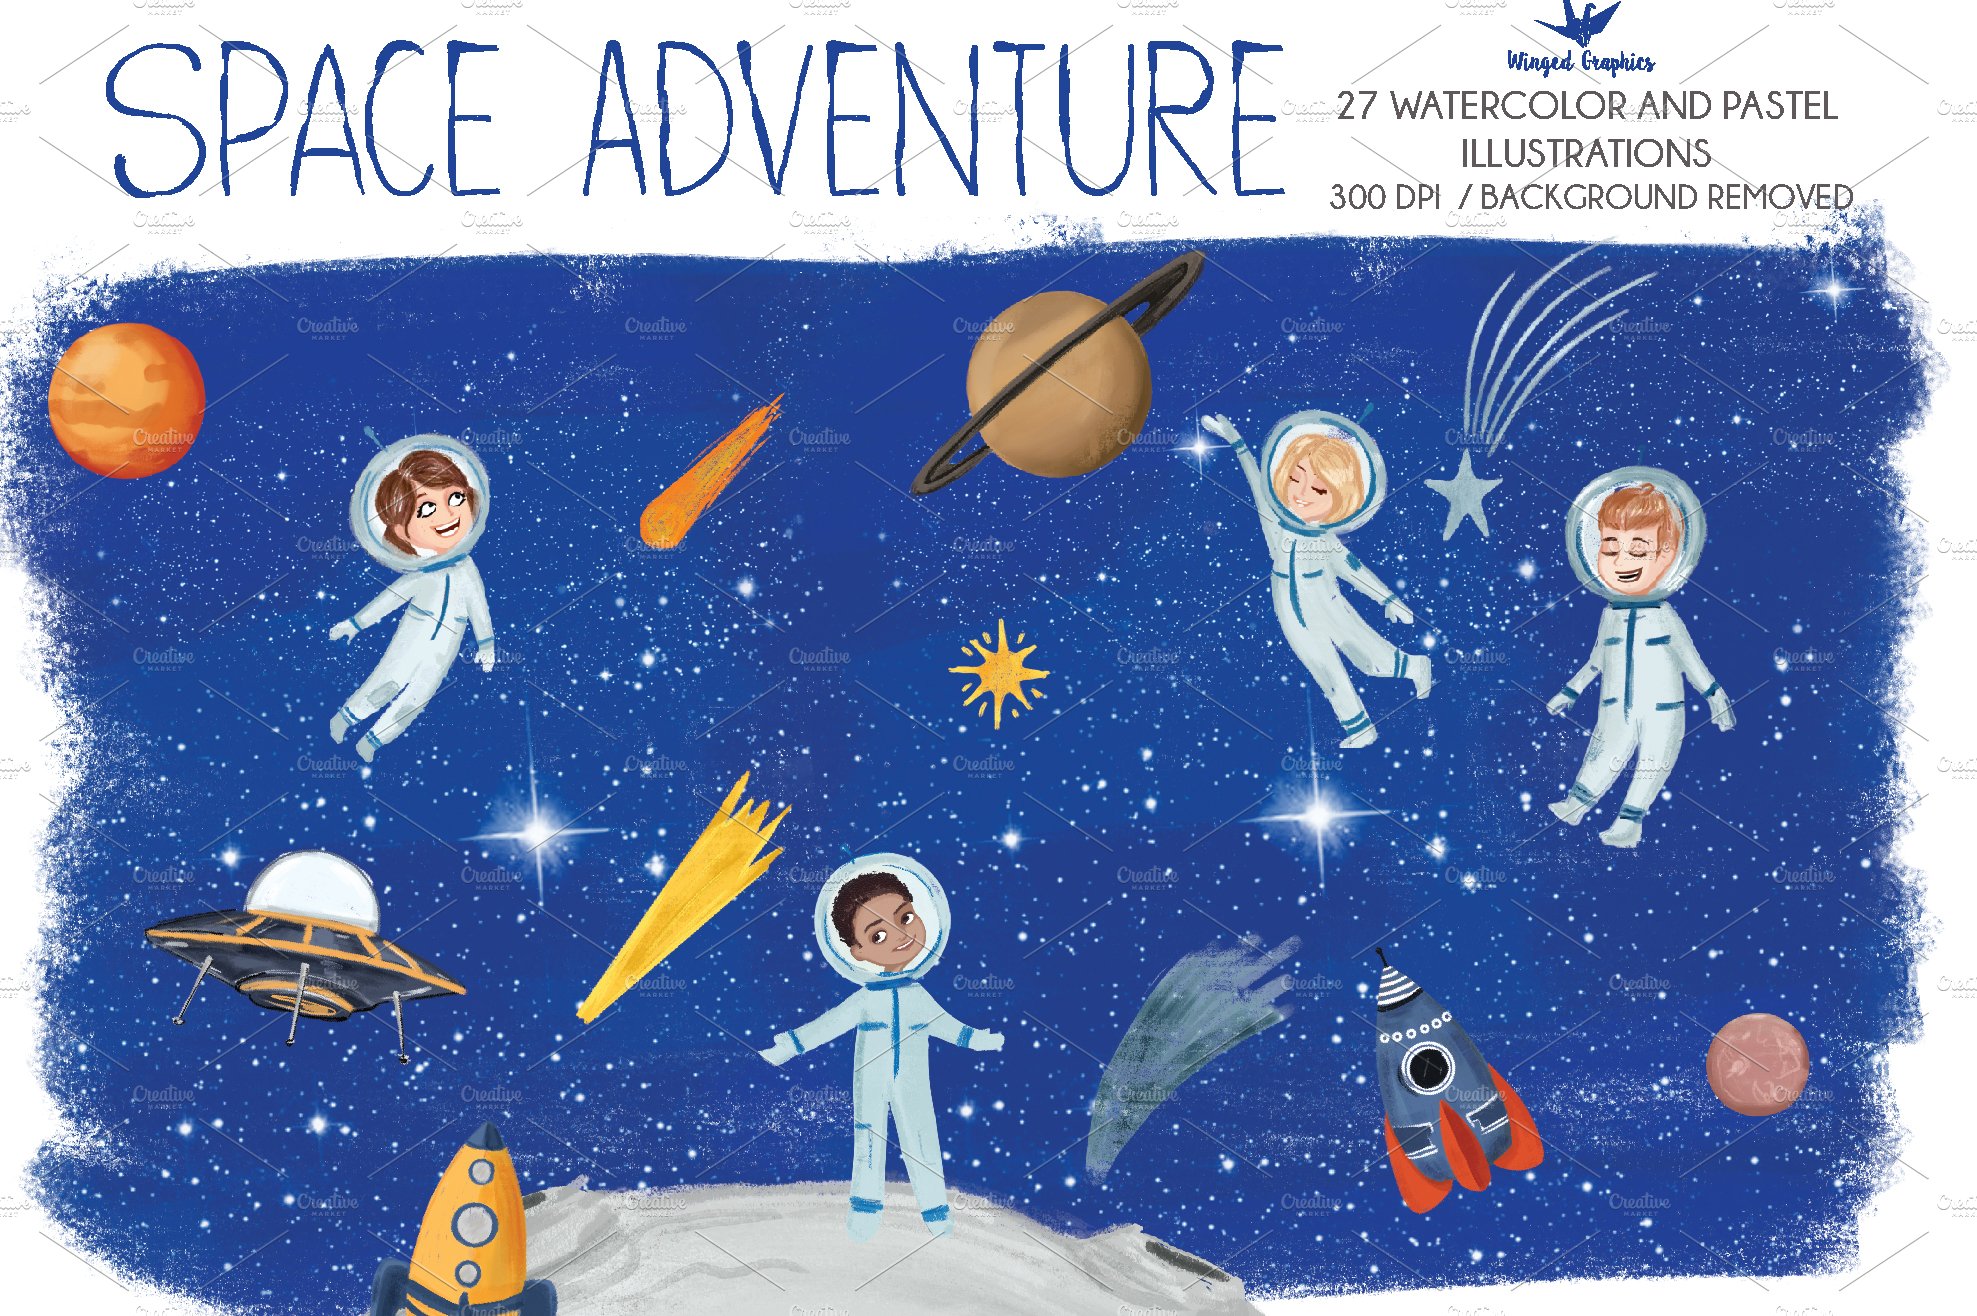 Kid's Space Adventure 27 items cover image.